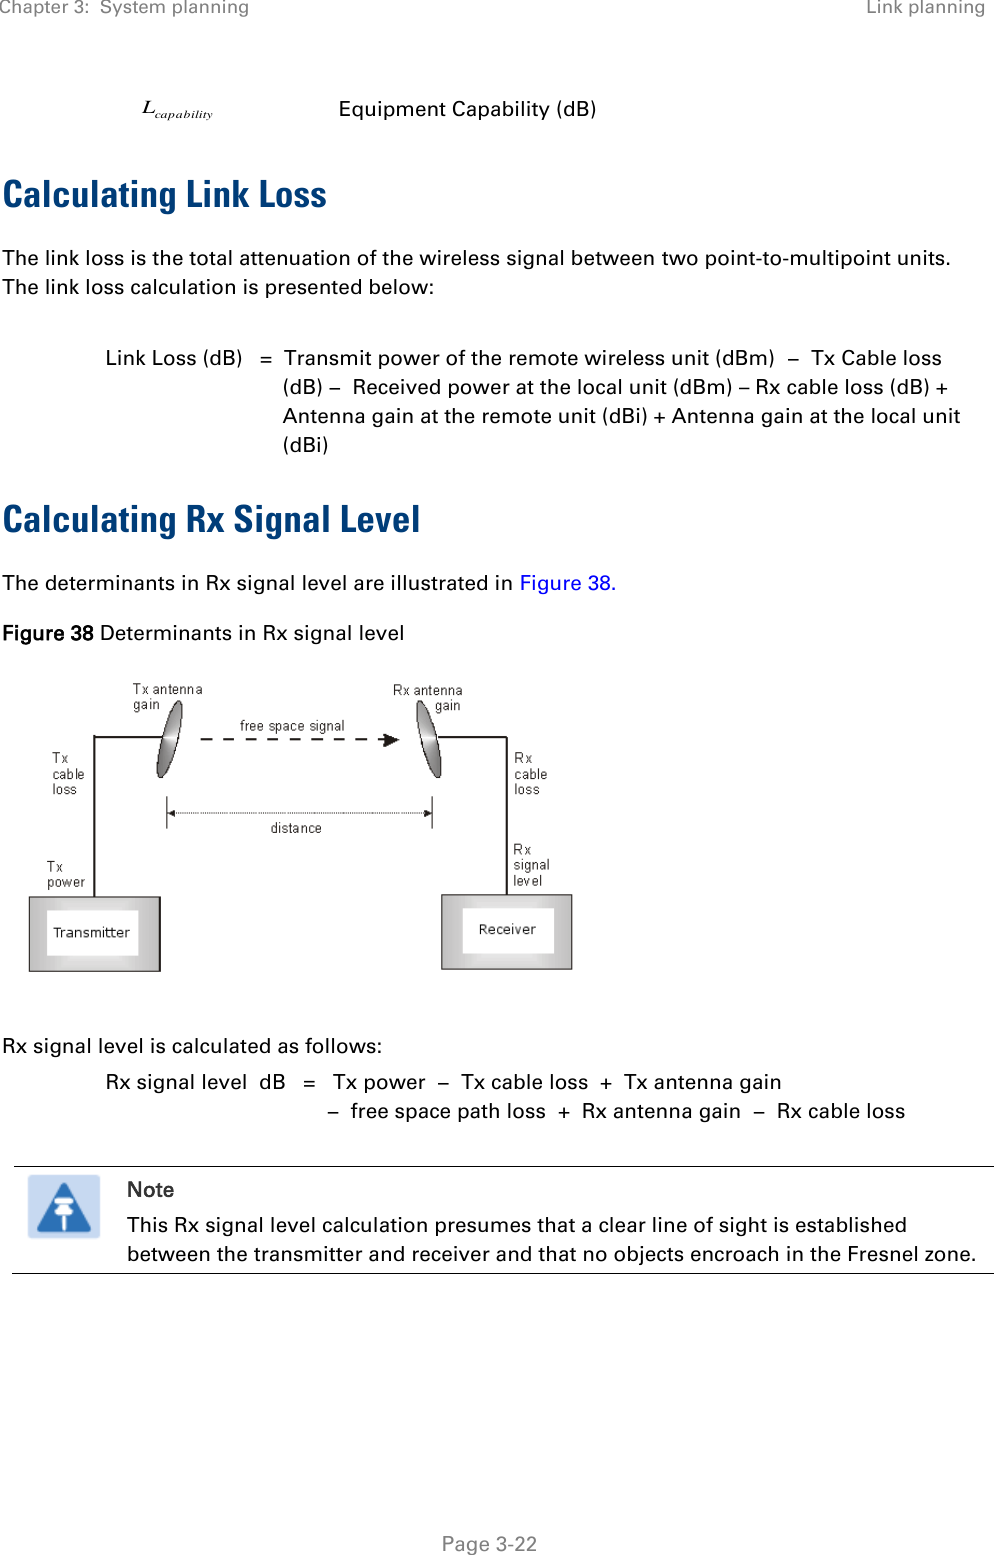 Chapter 3:  System planning Link planning   Page 3-22 capabilityL Equipment Capability (dB) Calculating Link Loss The link loss is the total attenuation of the wireless signal between two point-to-multipoint units. The link loss calculation is presented below:  Link Loss (dB)   =  Transmit power of the remote wireless unit (dBm)  −  Tx Cable loss (dB) −  Received power at the local unit (dBm) – Rx cable loss (dB) + Antenna gain at the remote unit (dBi) + Antenna gain at the local unit (dBi) Calculating Rx Signal Level The determinants in Rx signal level are illustrated in Figure 38. Figure 38 Determinants in Rx signal level   Rx signal level is calculated as follows: Rx signal level  dB   =   Tx power  −  Tx cable loss  +  Tx antenna gain   −  free space path loss  +  Rx antenna gain  −  Rx cable loss   Note This Rx signal level calculation presumes that a clear line of sight is established between the transmitter and receiver and that no objects encroach in the Fresnel zone.  